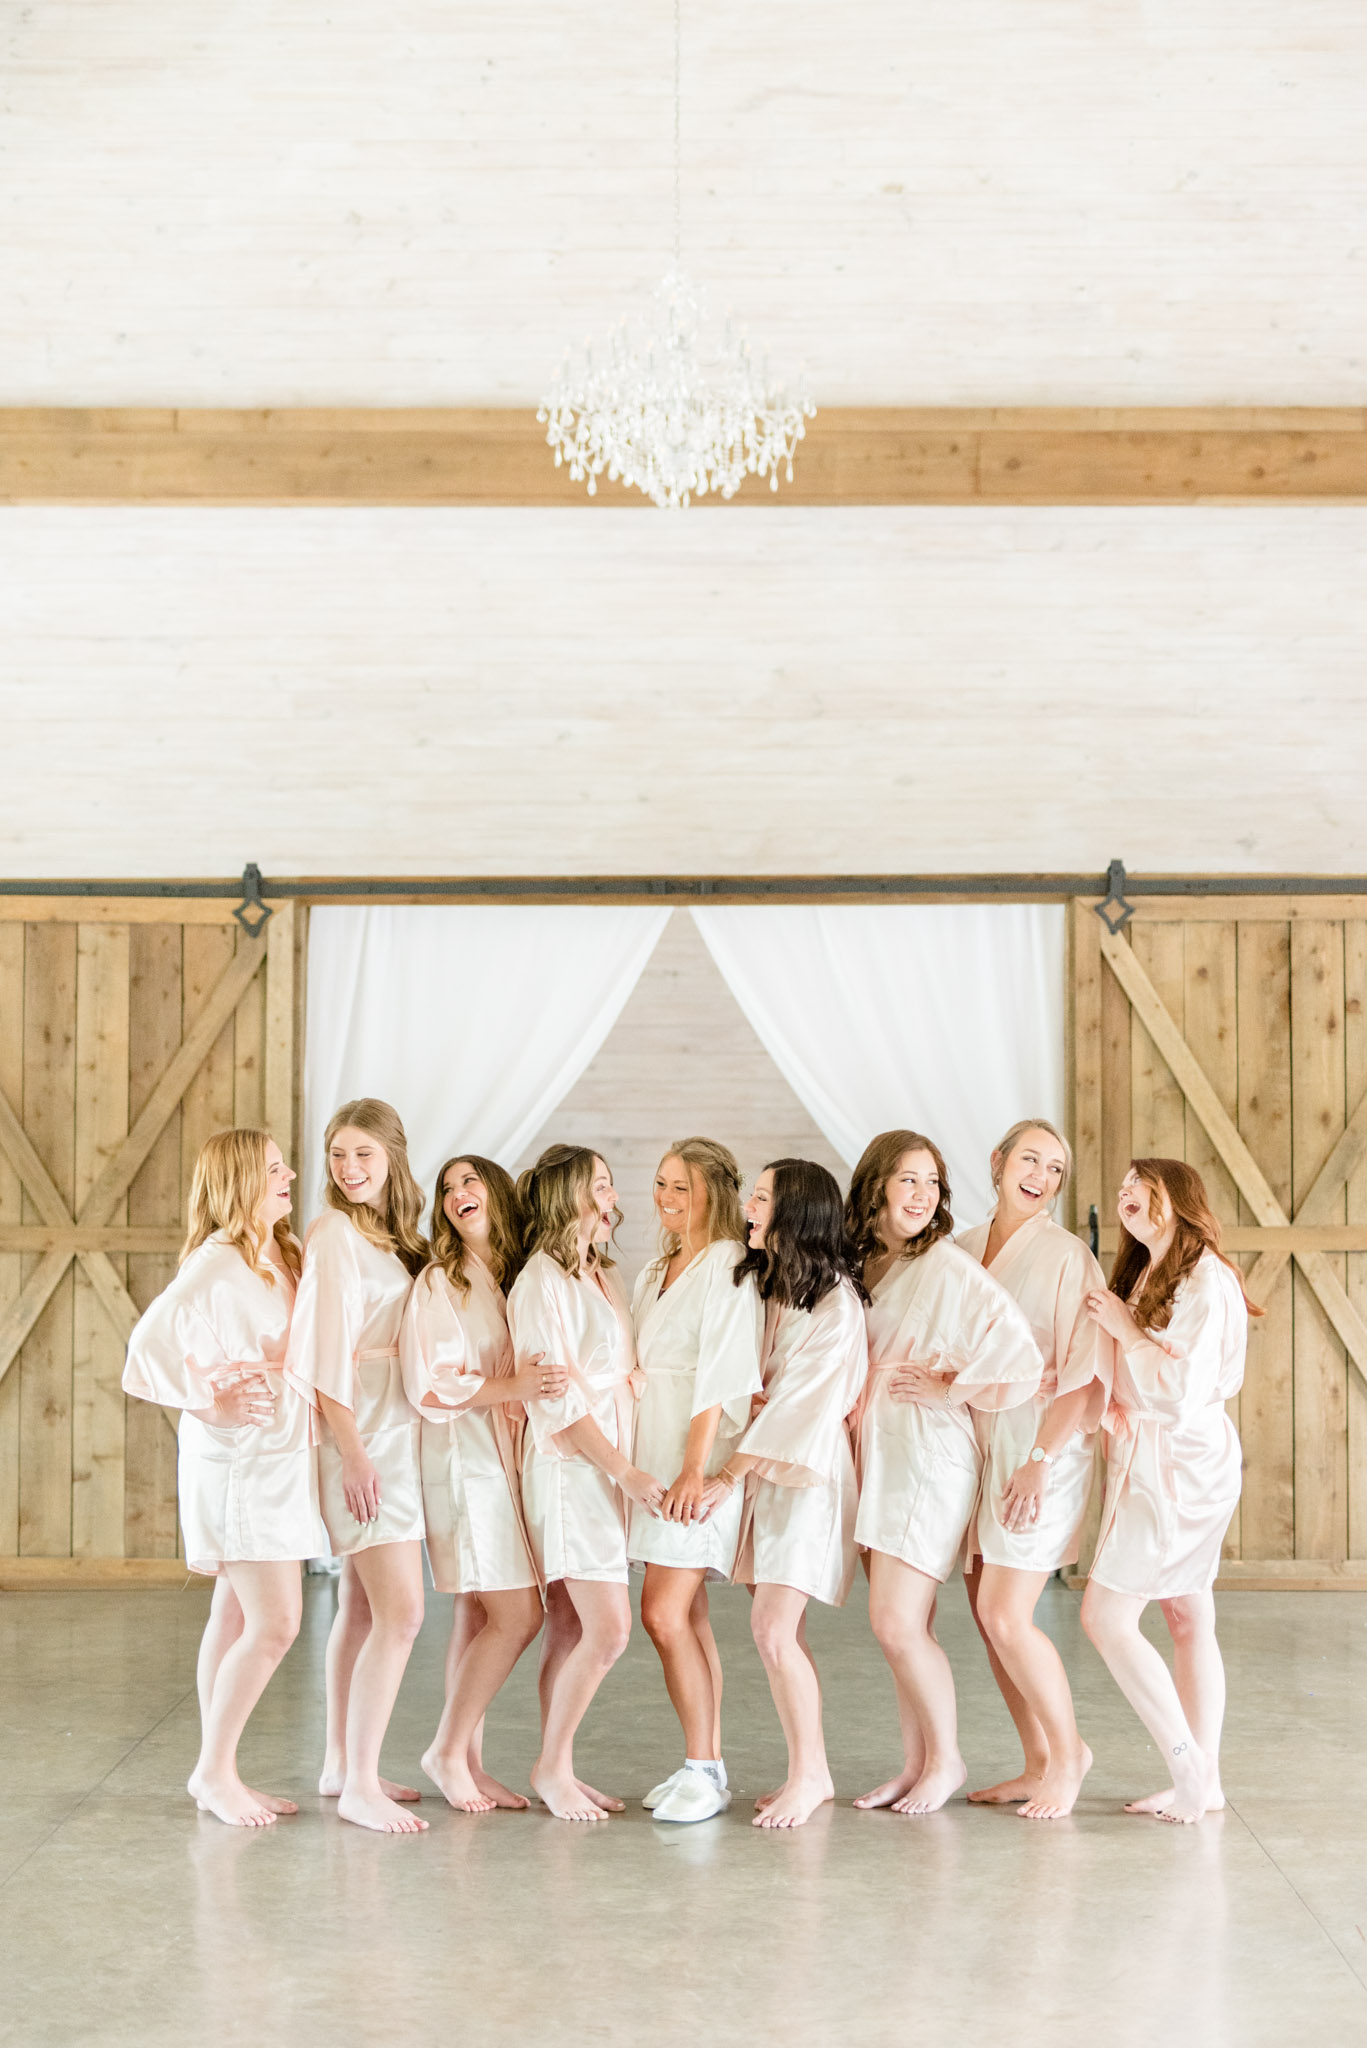 Bridal party laugh while getting ready.